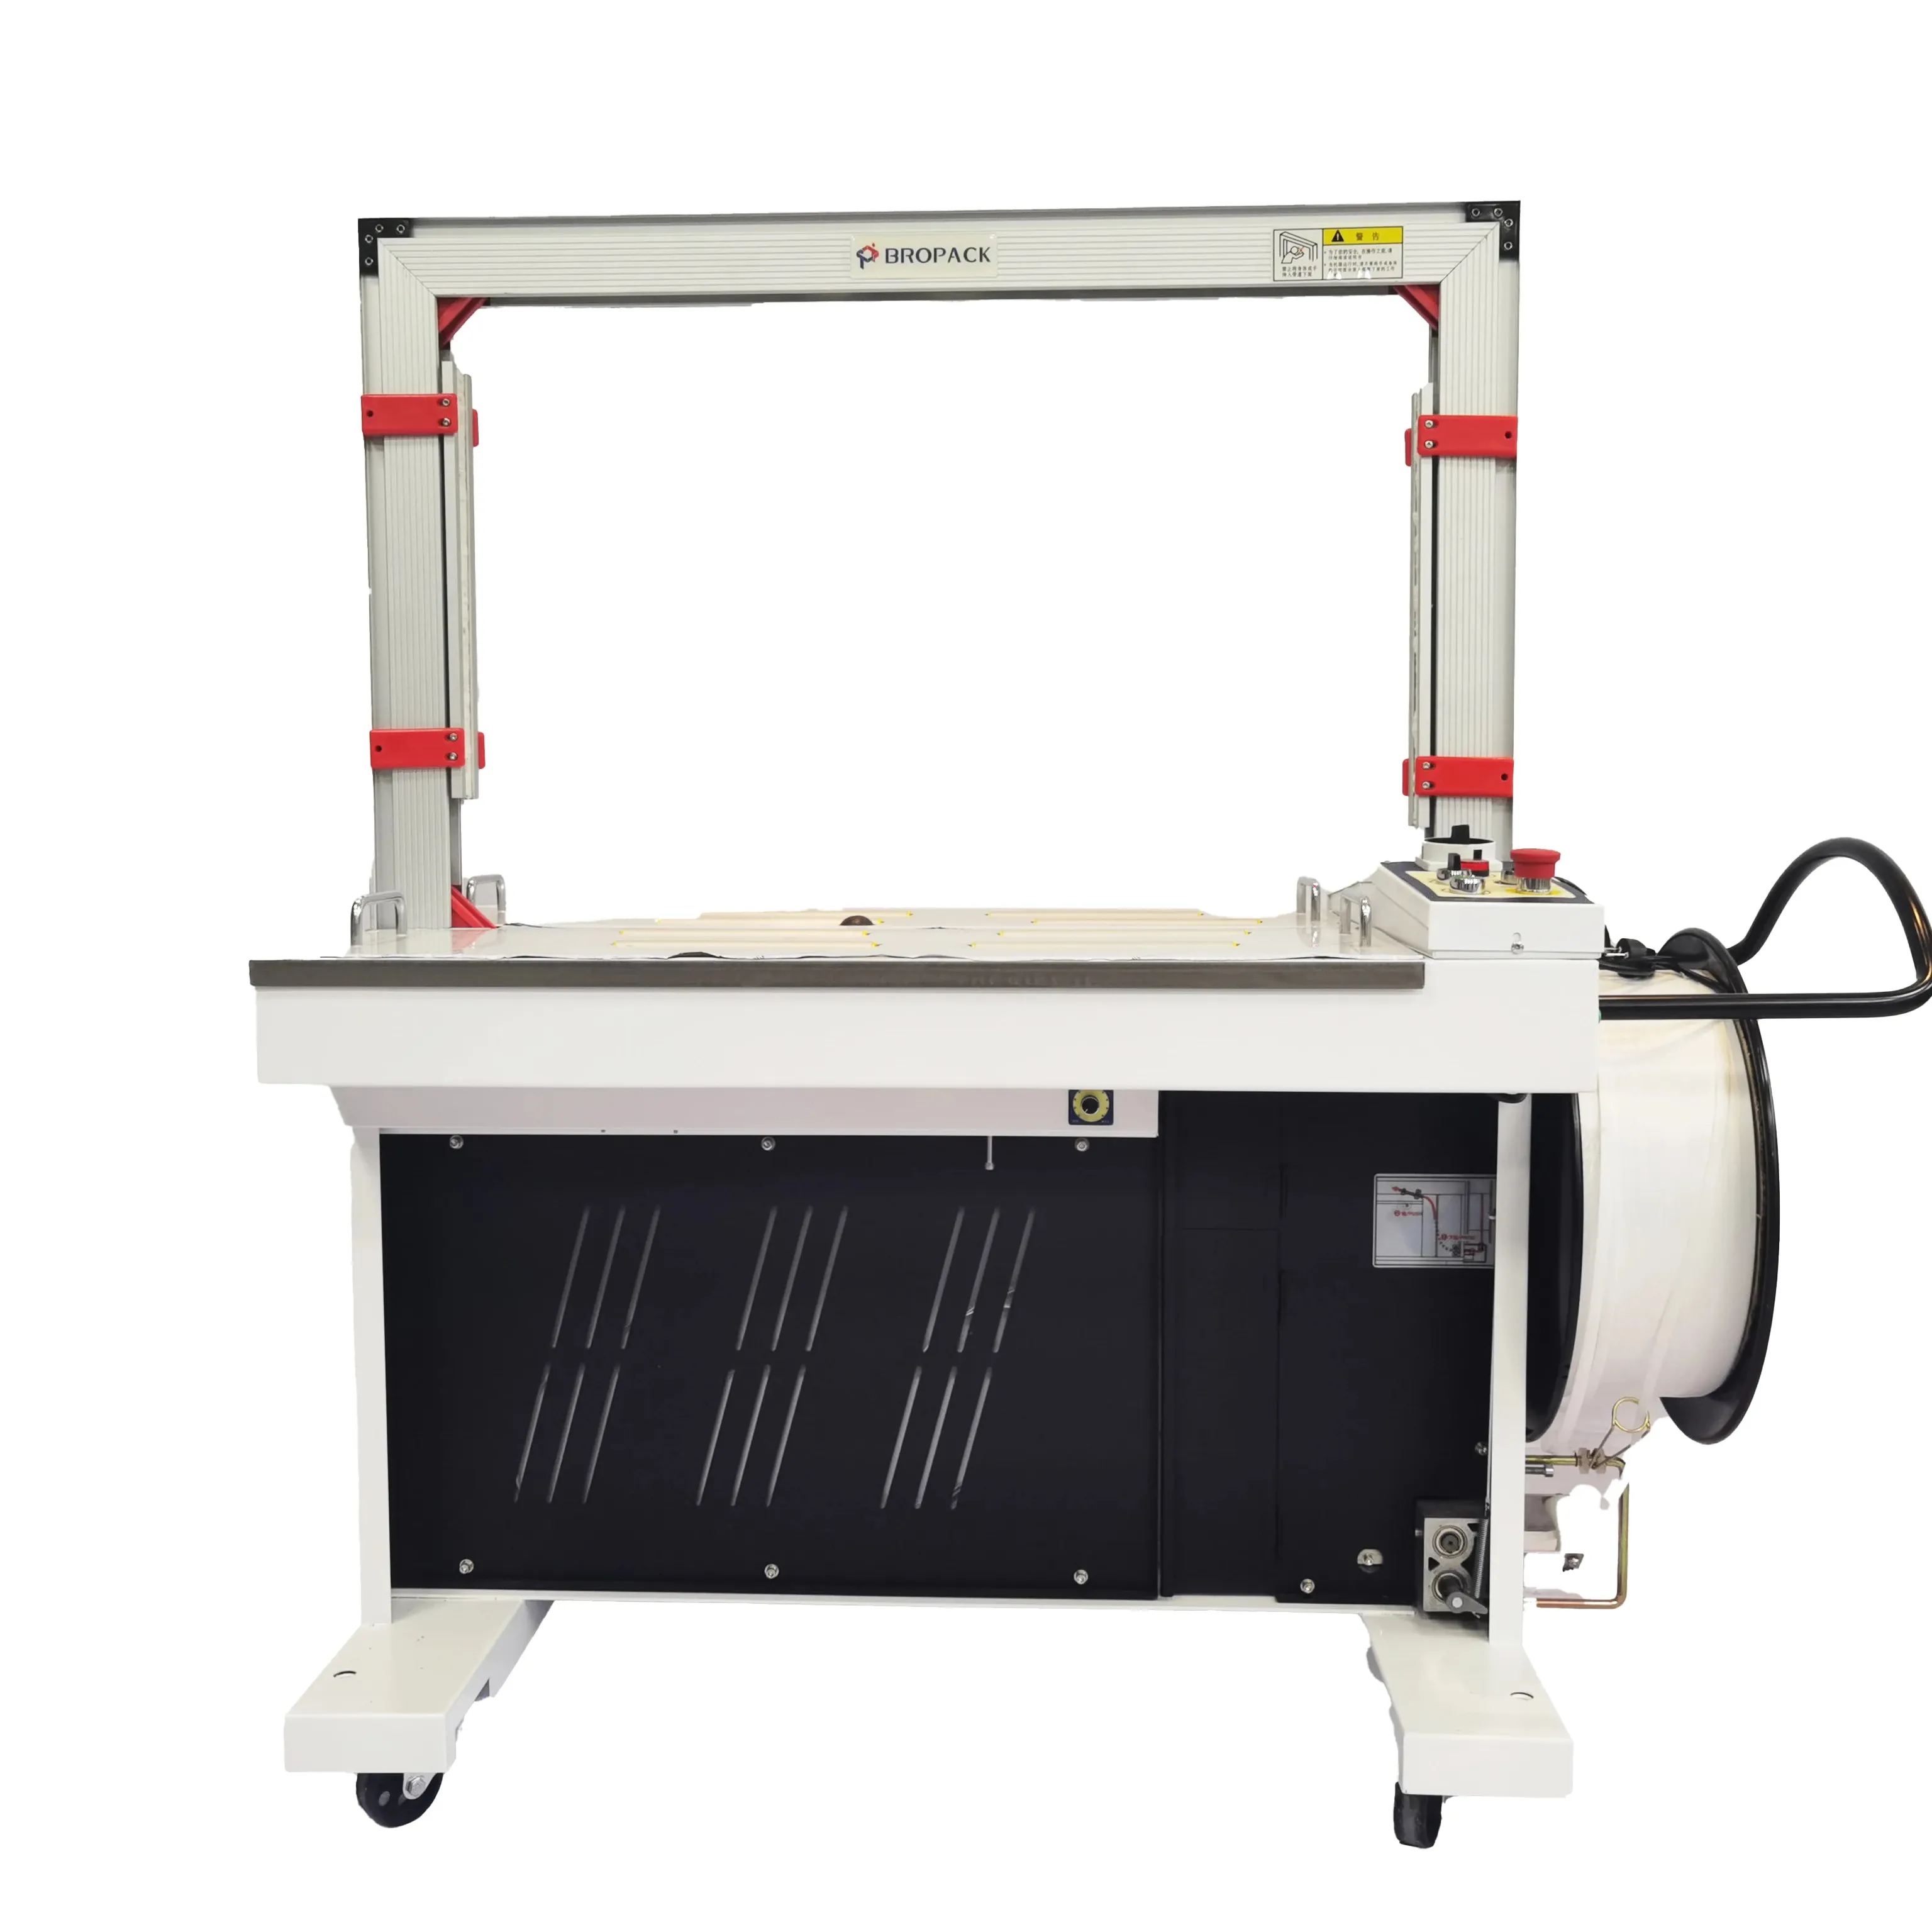 Bropack AP8060B High performance fully auto strapping machine/automatic pp belt strapping machine